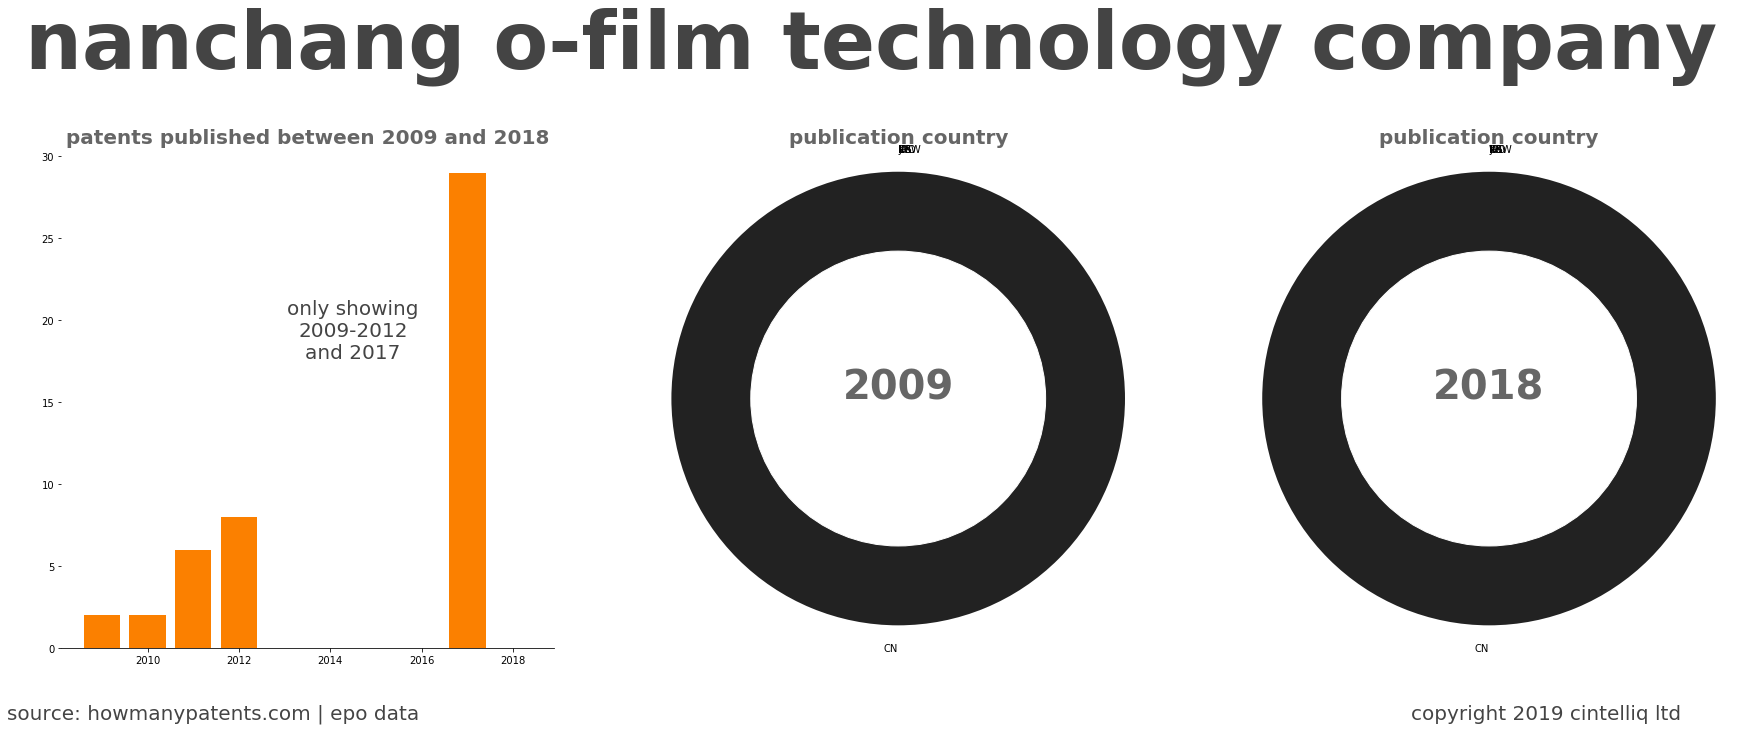 summary of patents for Nanchang O-Film Technology Company